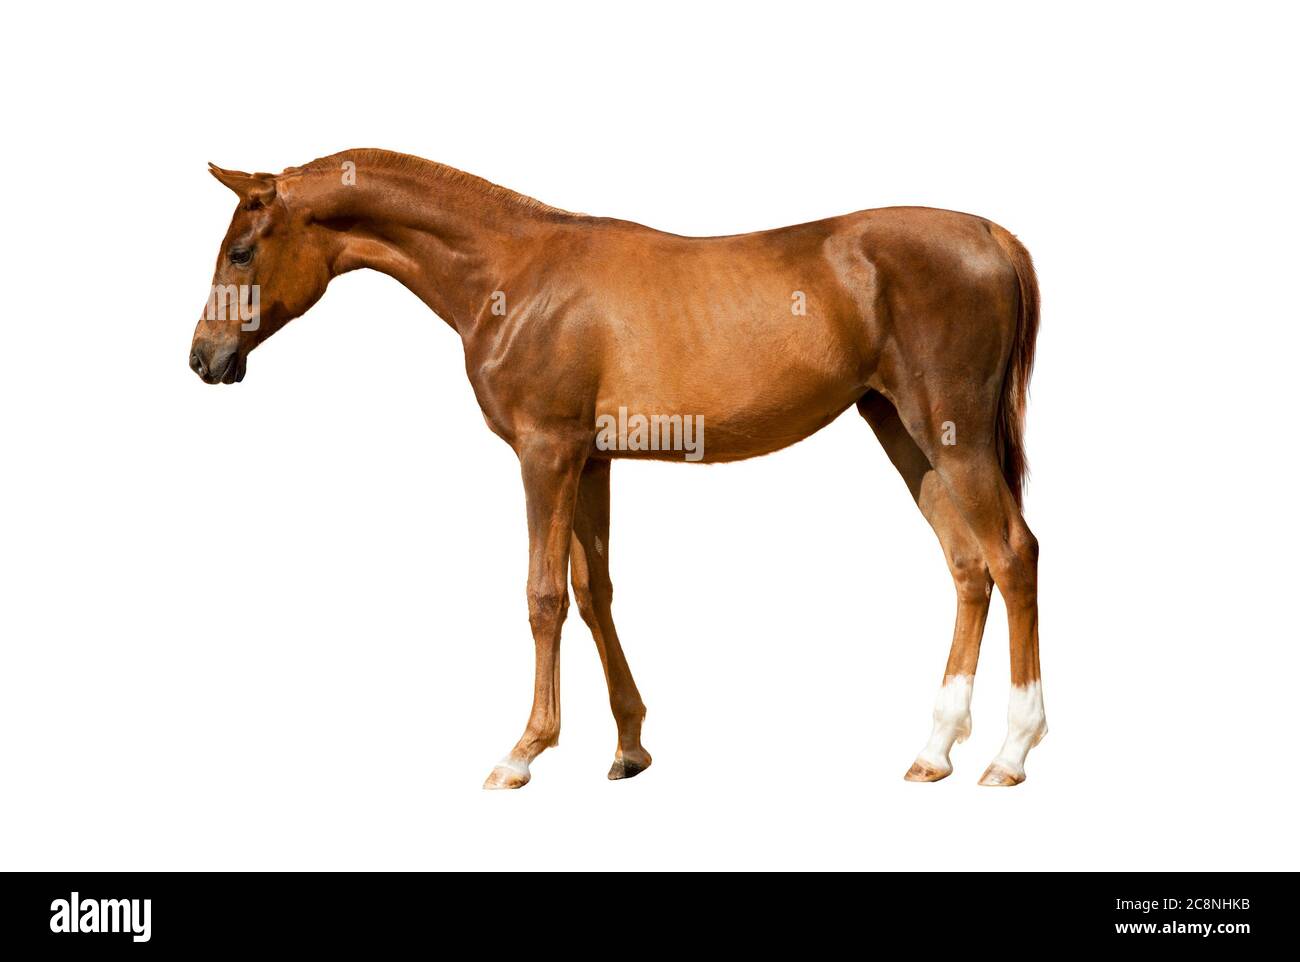 Young chestnut horse standing, isolated over a white background Stock Photo